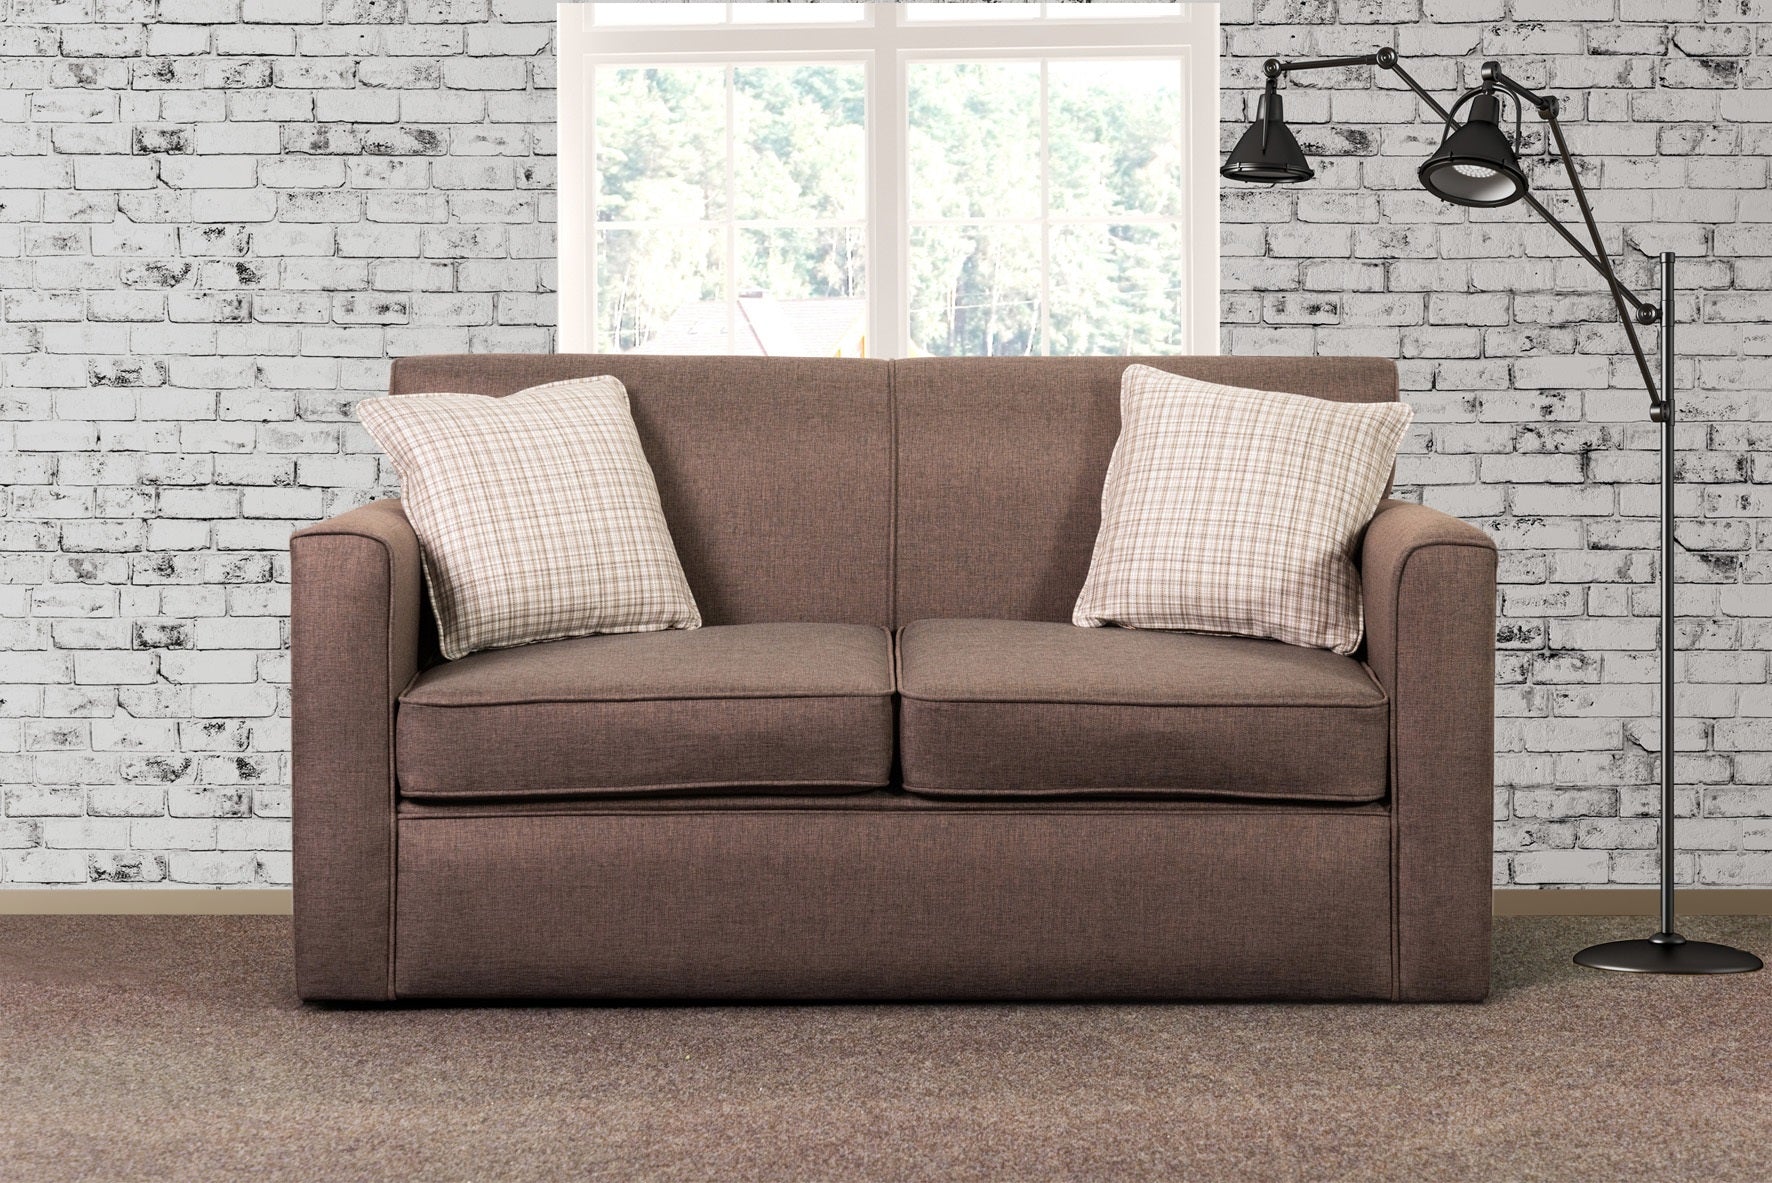 kendal 2 seater sofa bed